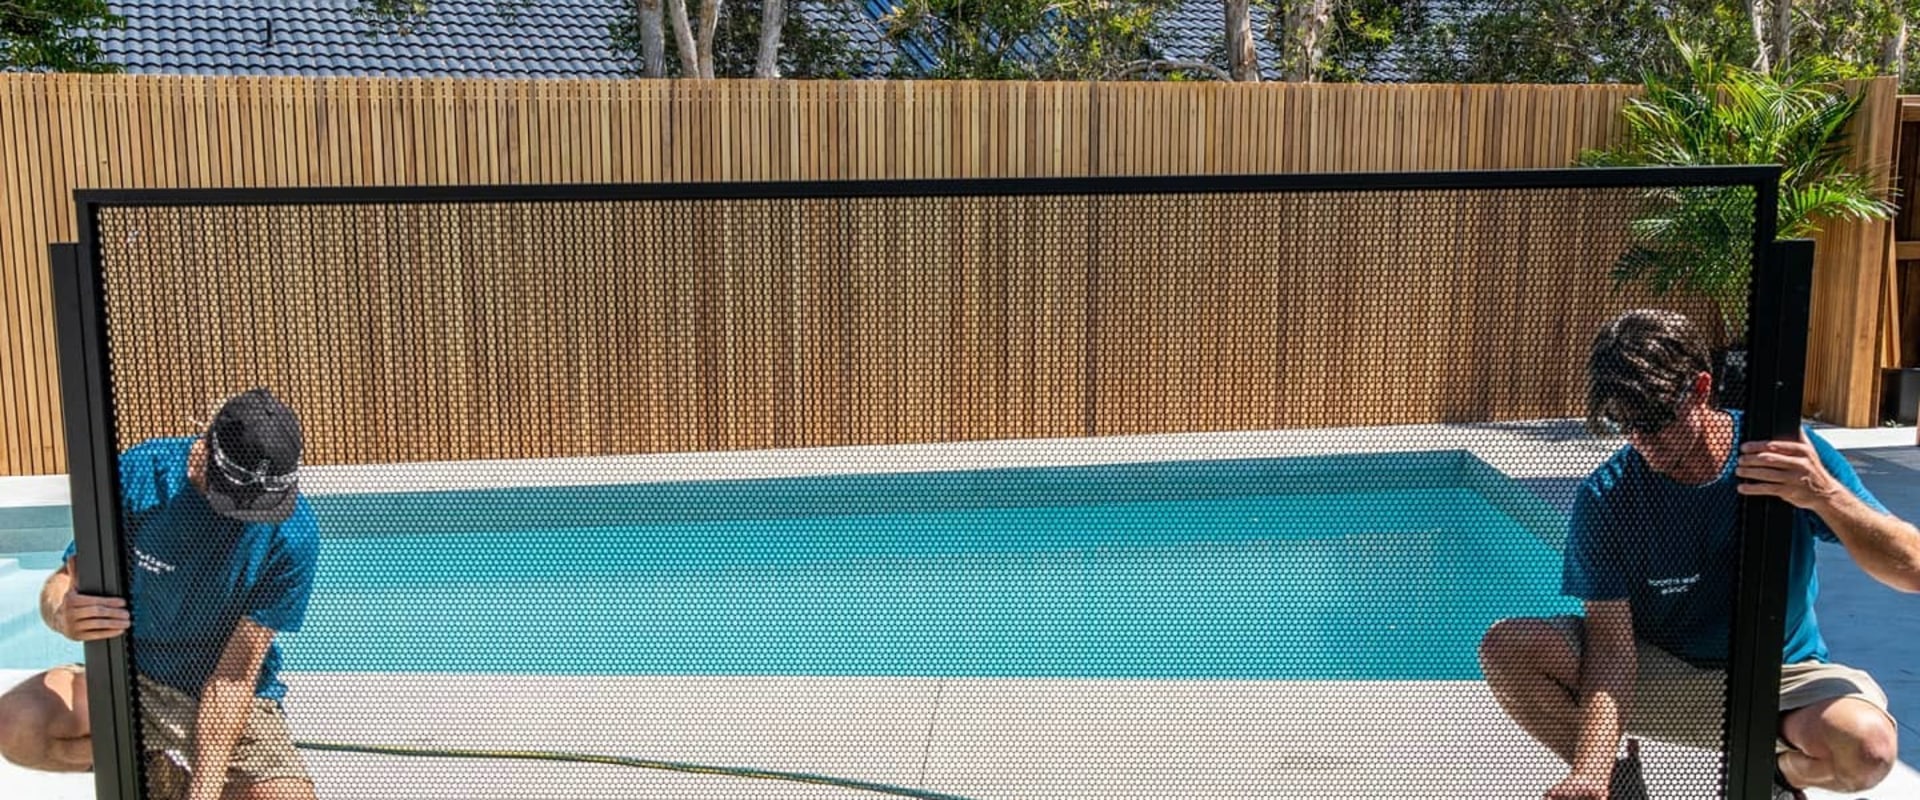 Installing a Pool Fence: A Comprehensive Guide